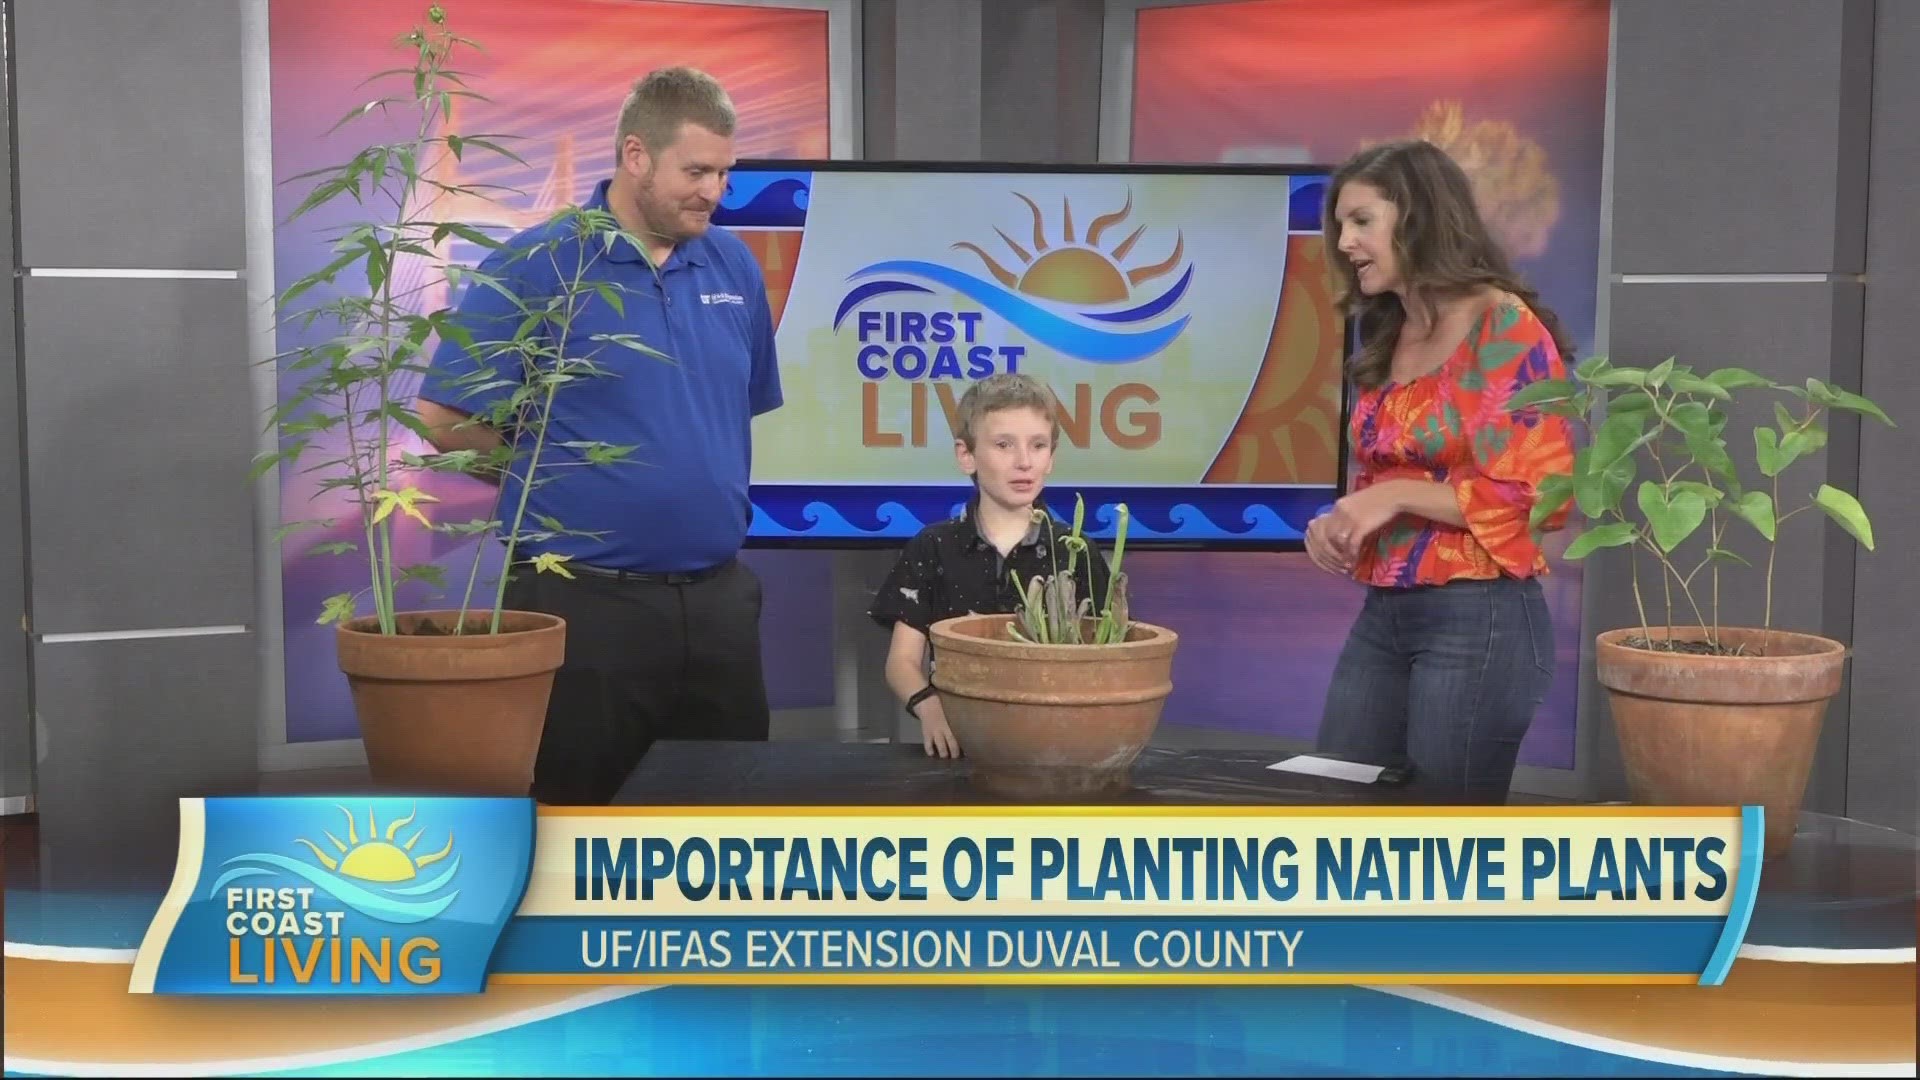 Stephen Jennewein with UF/IFAS Extension Duval County, and his son Thomas, show off some Florida native plants.